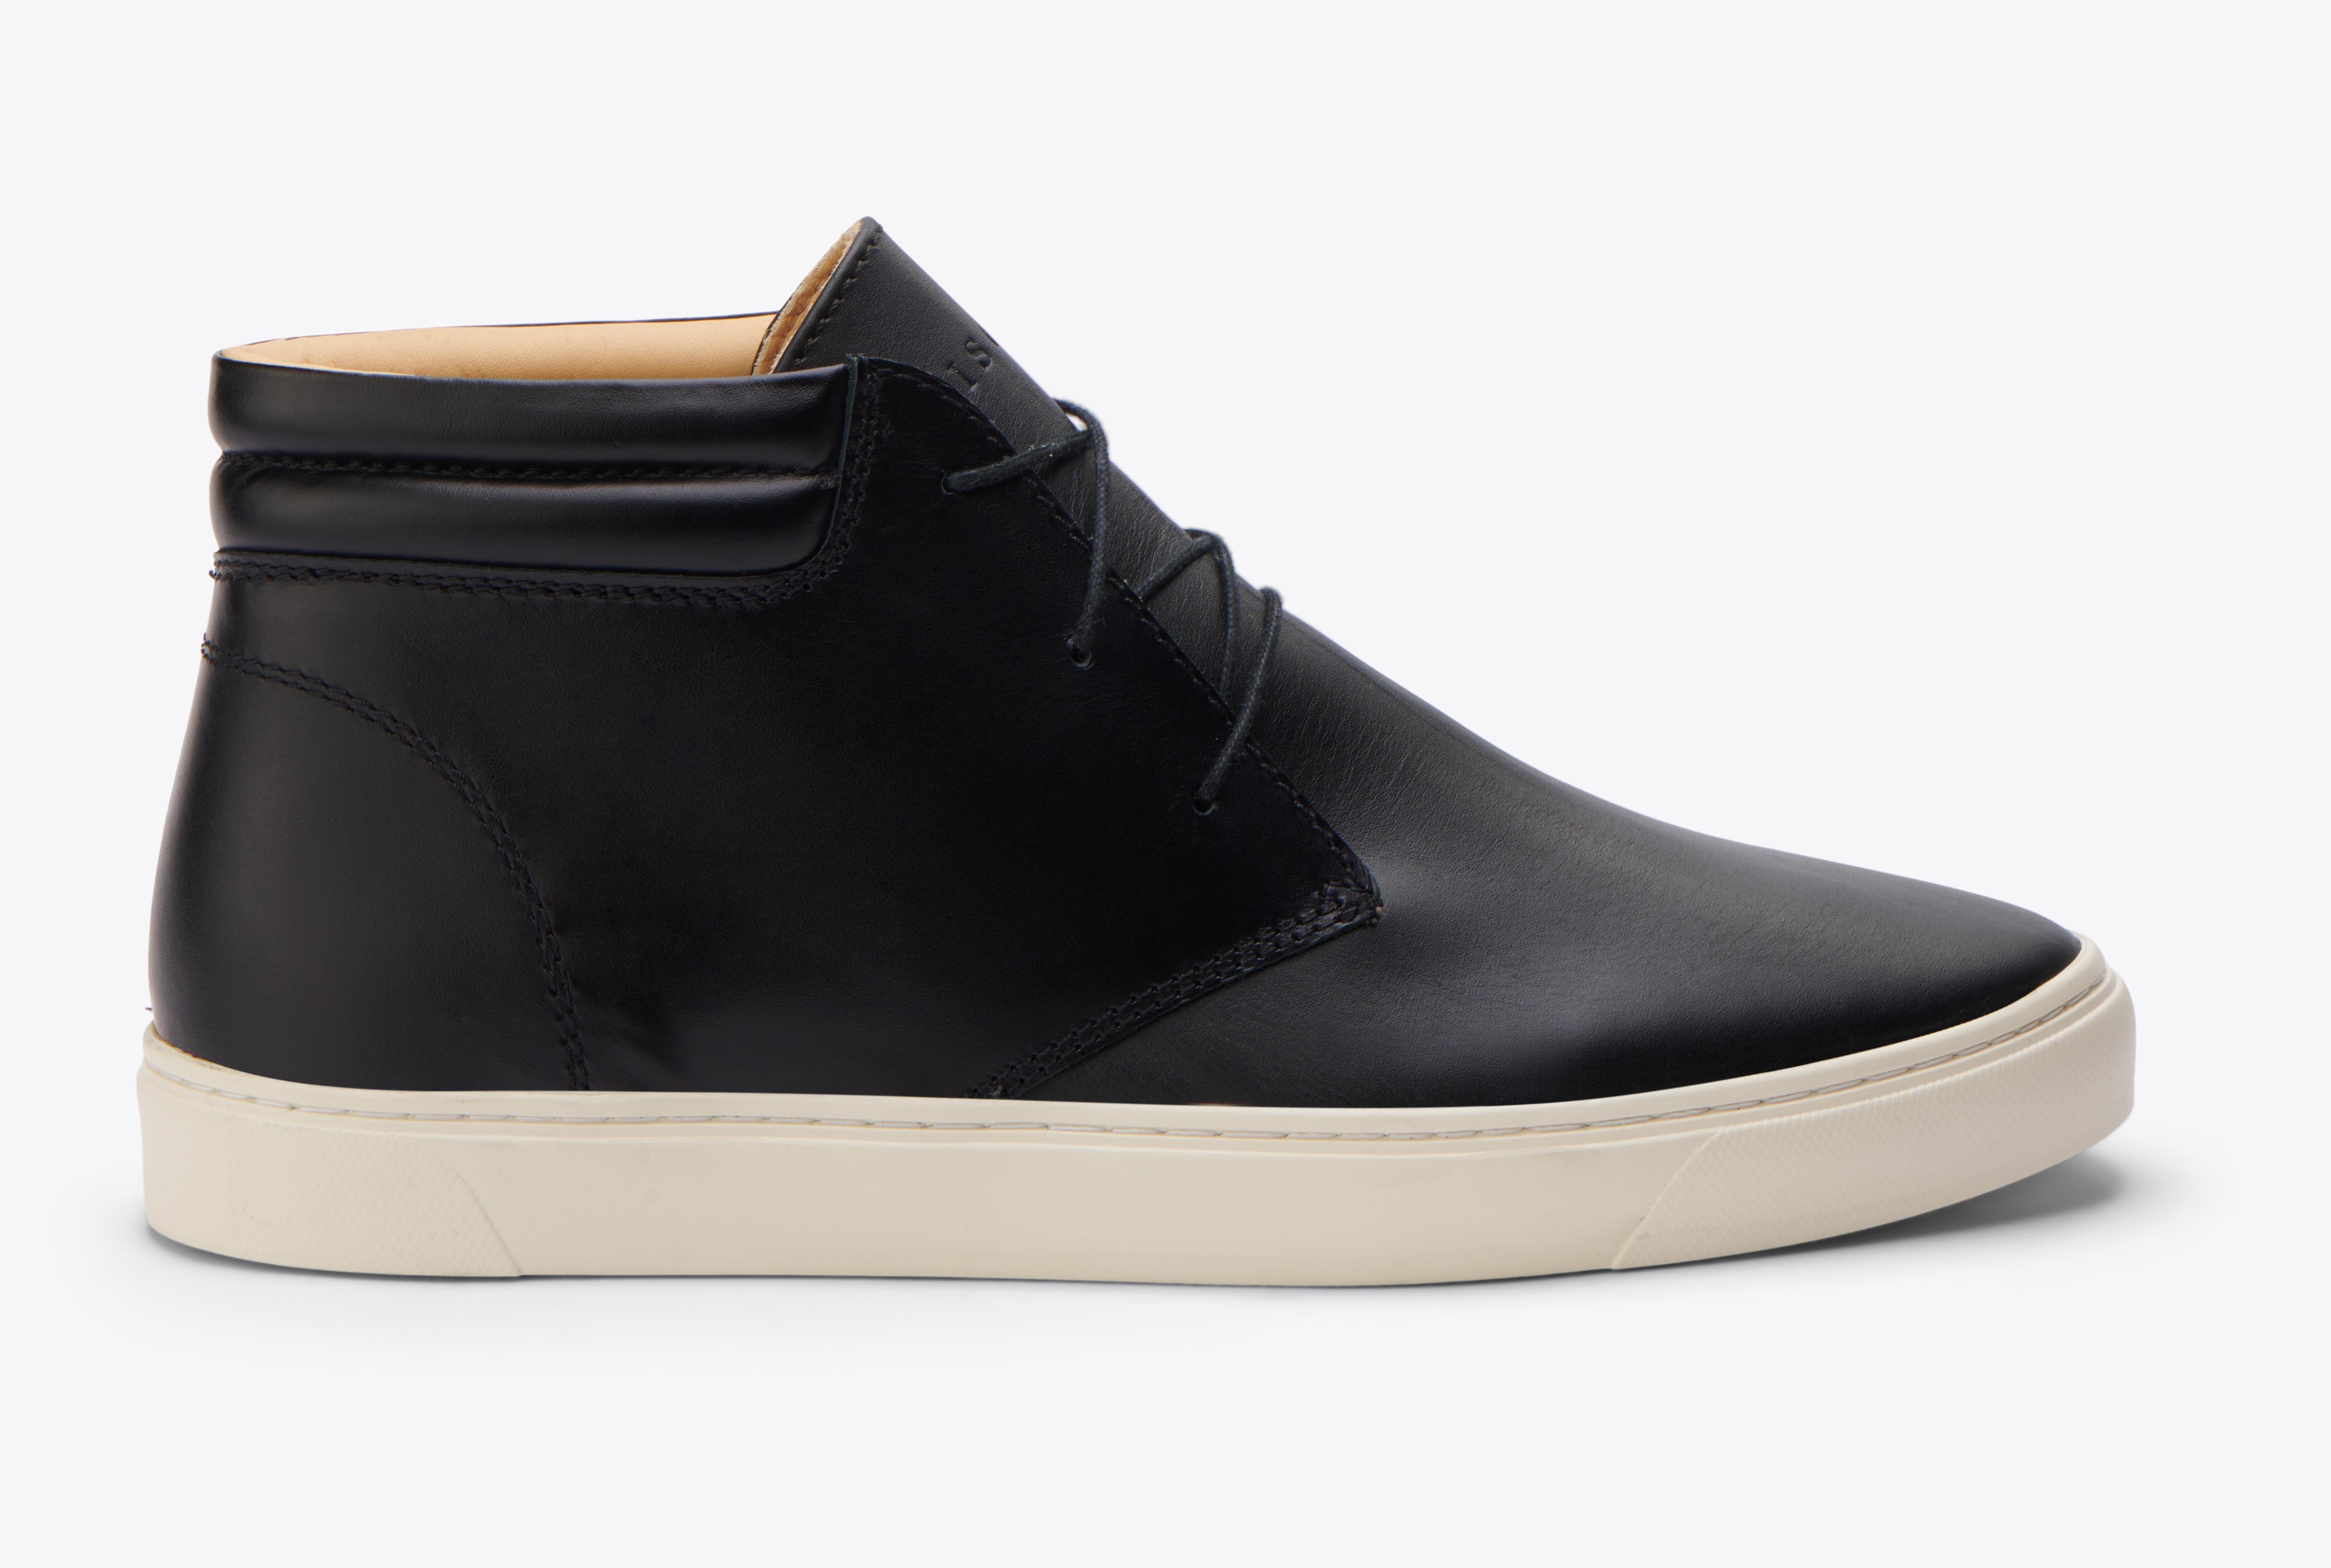 Nisolo Everyday Mid Top Sneaker Black - Every Nisolo product is built on the foundation of comfort, function, and design. 